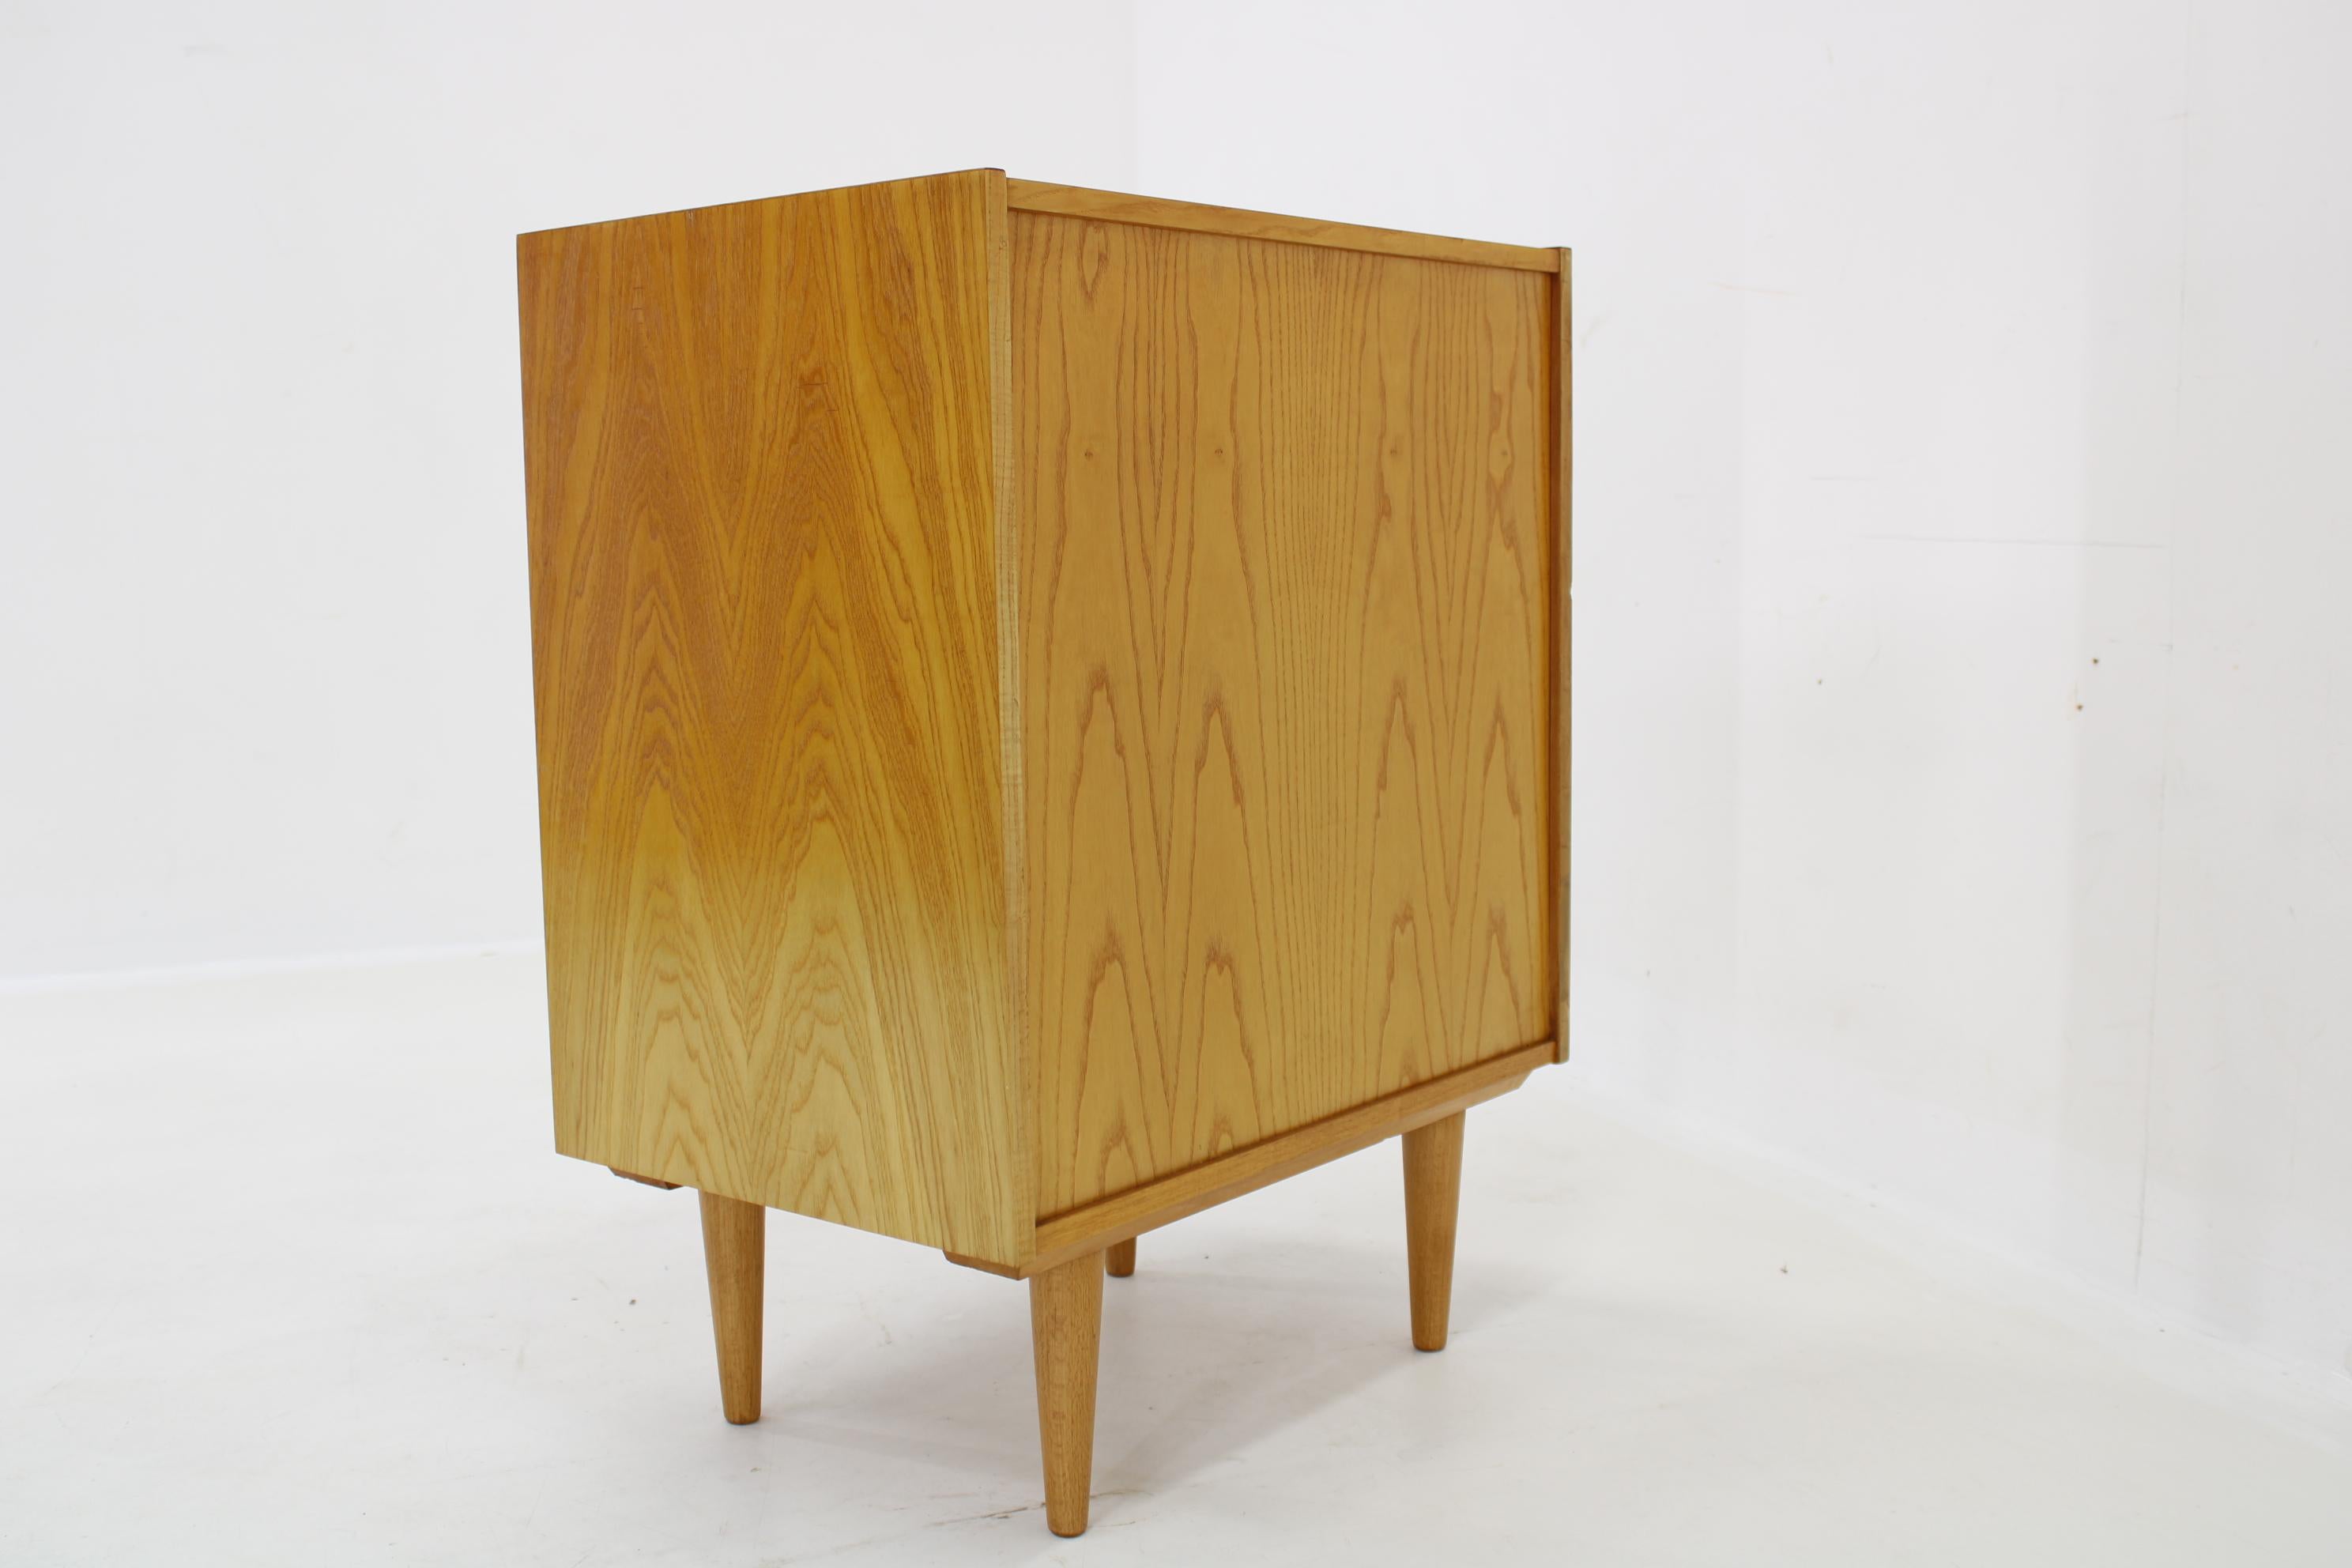 Wood 1960s Chest of Drawers in Maple Finish, Czechoslovakia For Sale